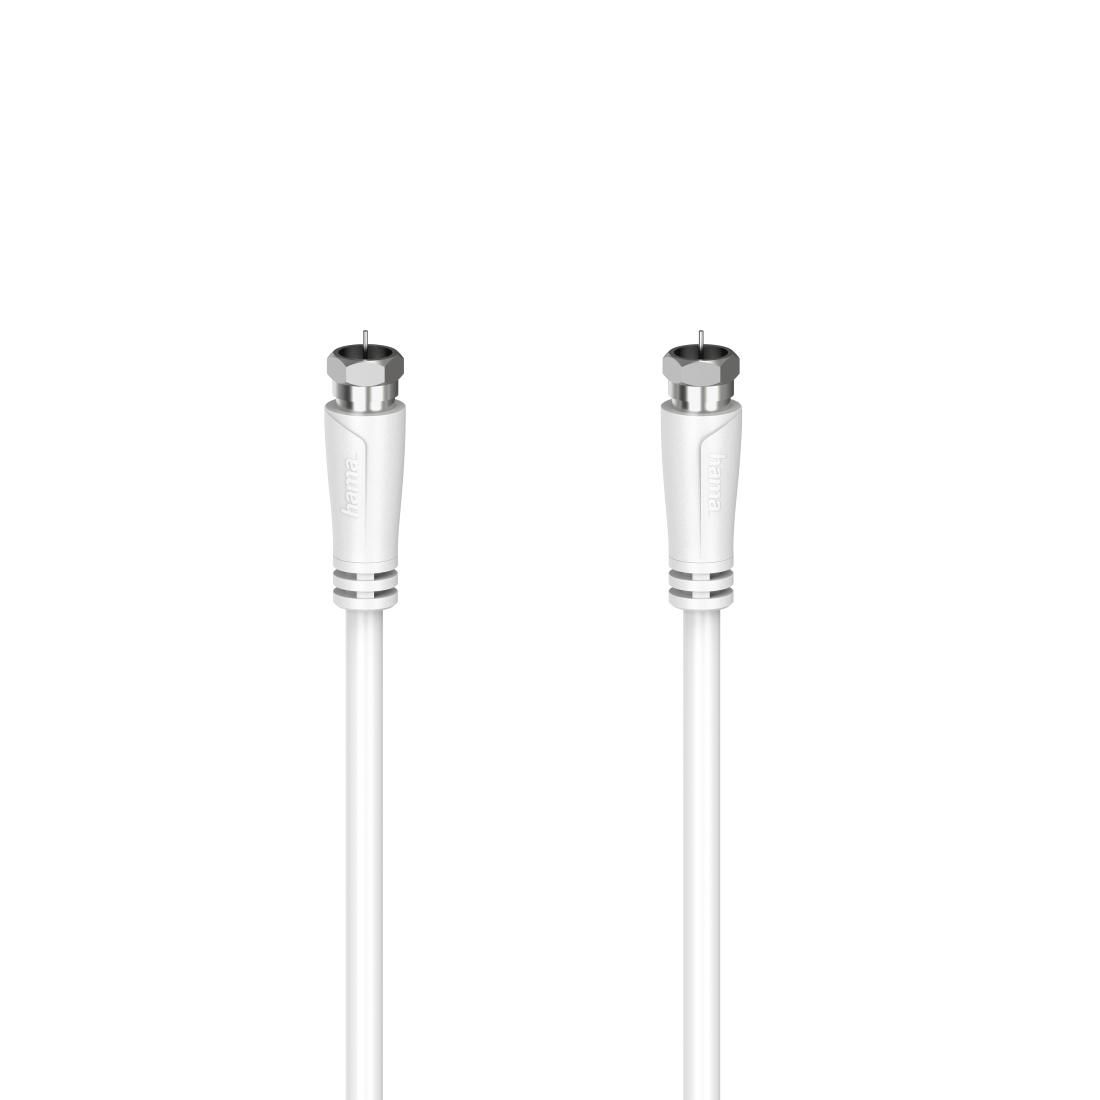 Hama 205064 W128824606 4 Coaxial Cable 3 M F White 